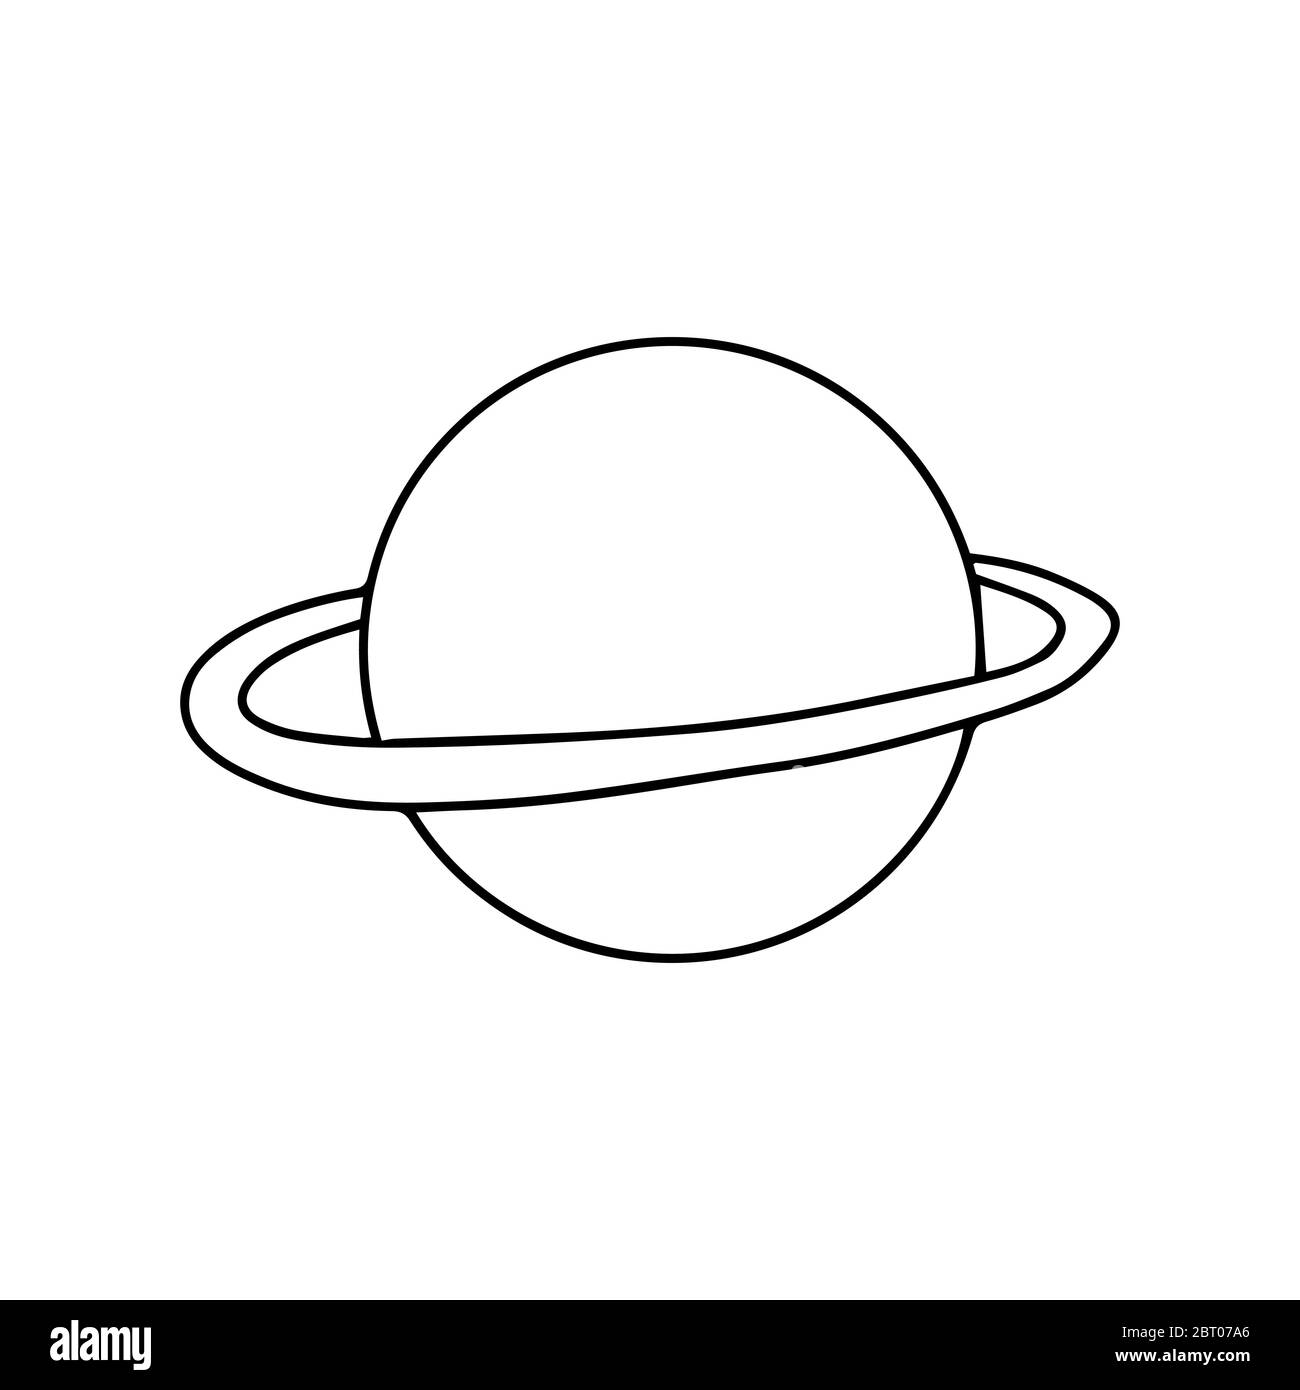 Cute hand drawn doodle saturn planet. Isolated on white background. Vector stock illustration. Stock Vector